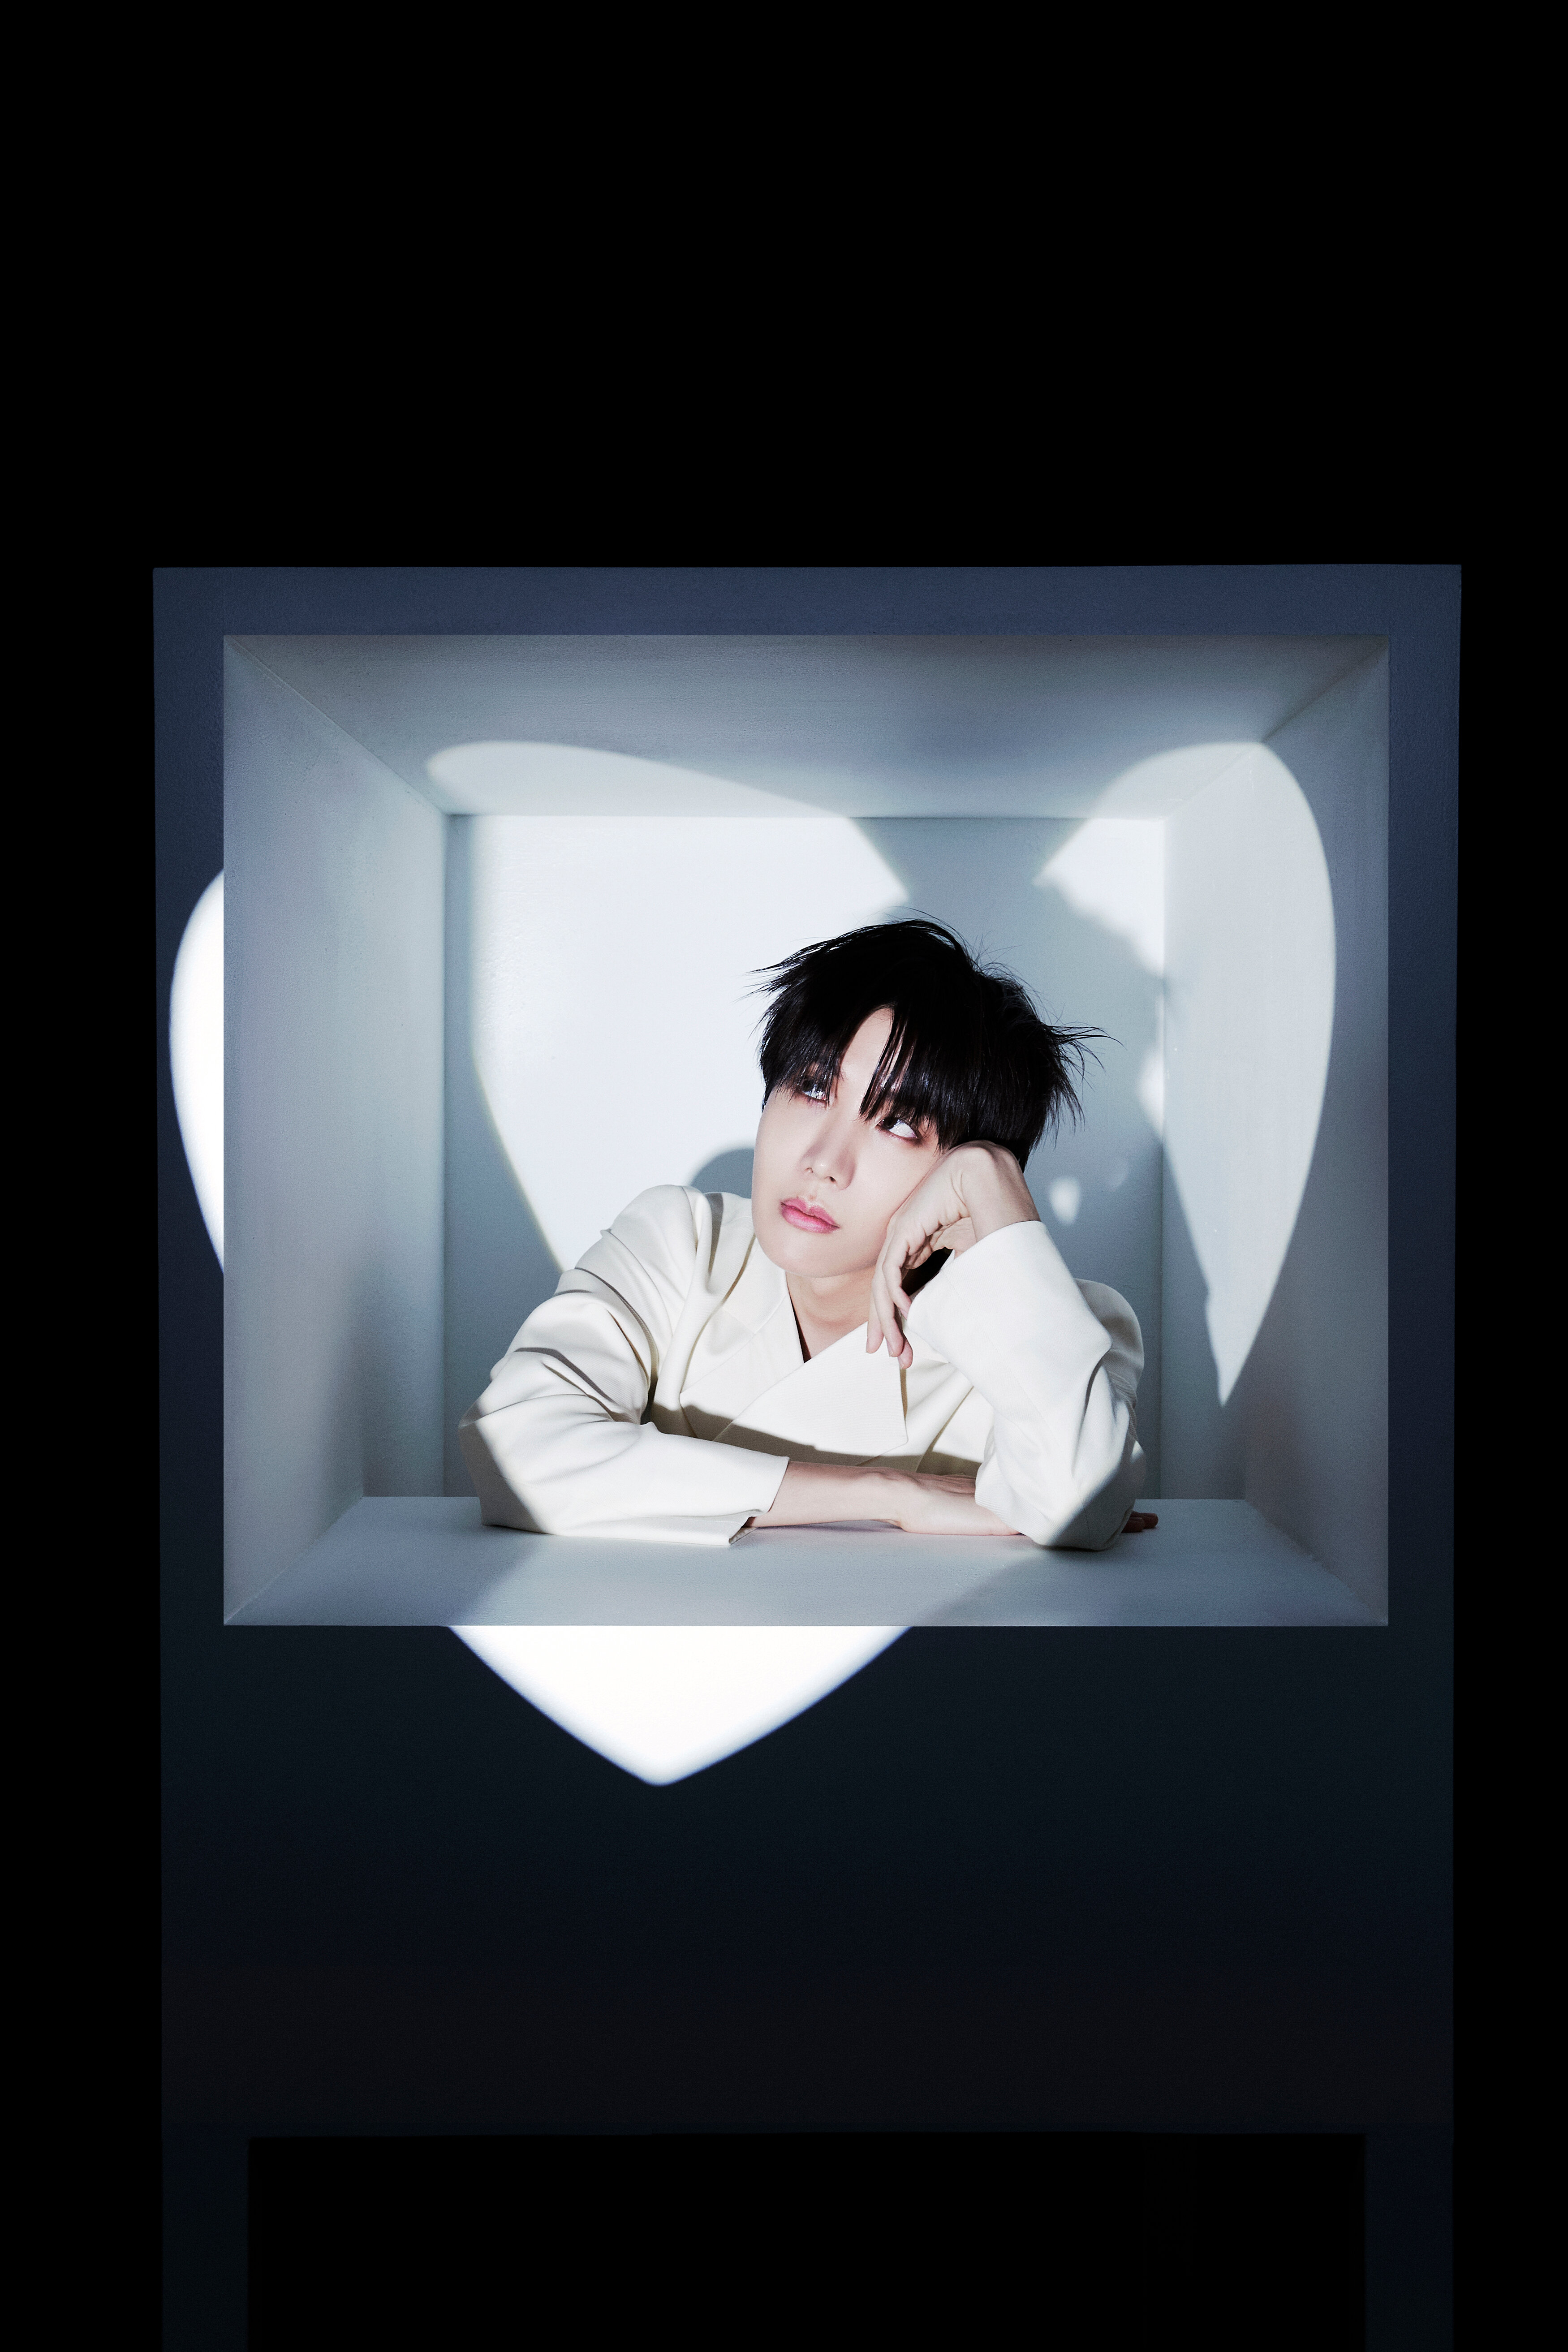 j-hope - “Jack In The Box” (HOPE Edition) Concept Photo